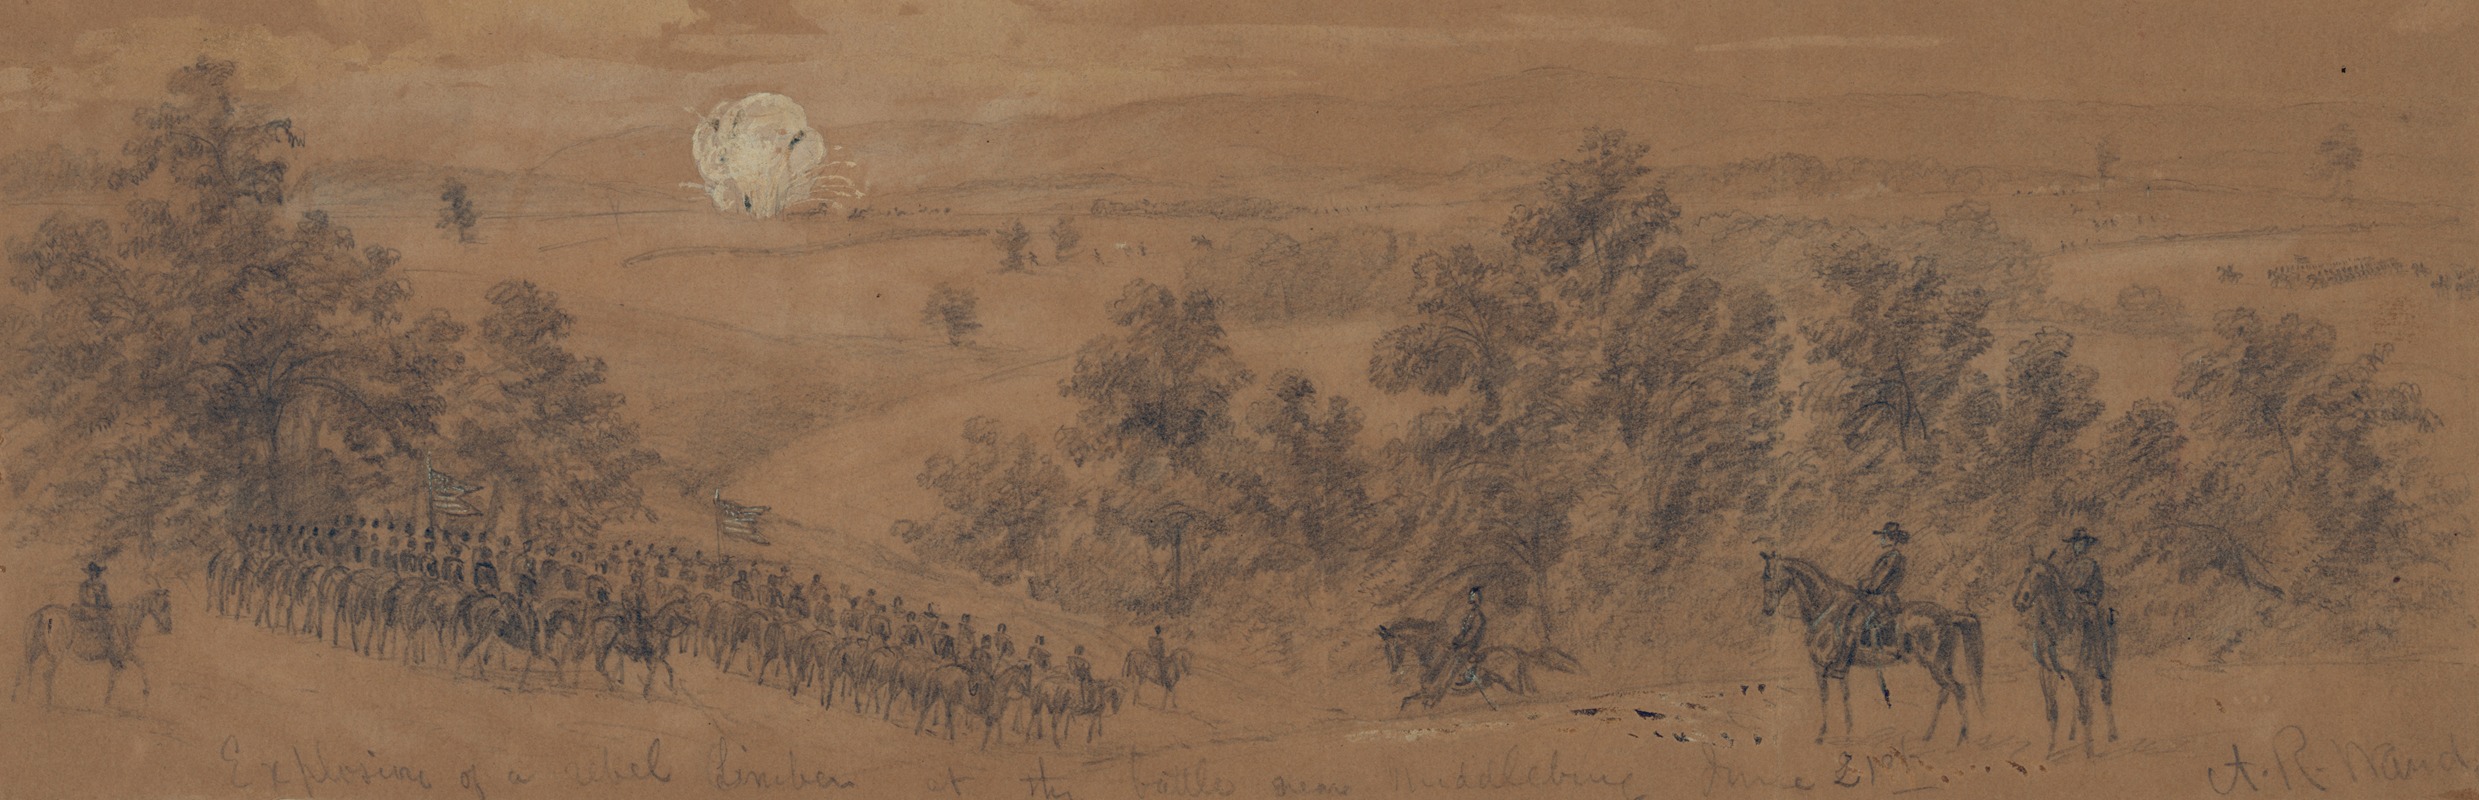 Alfred Rudolph Waud - Explosion of a rebel limber at the battle near Middleburg June 21st